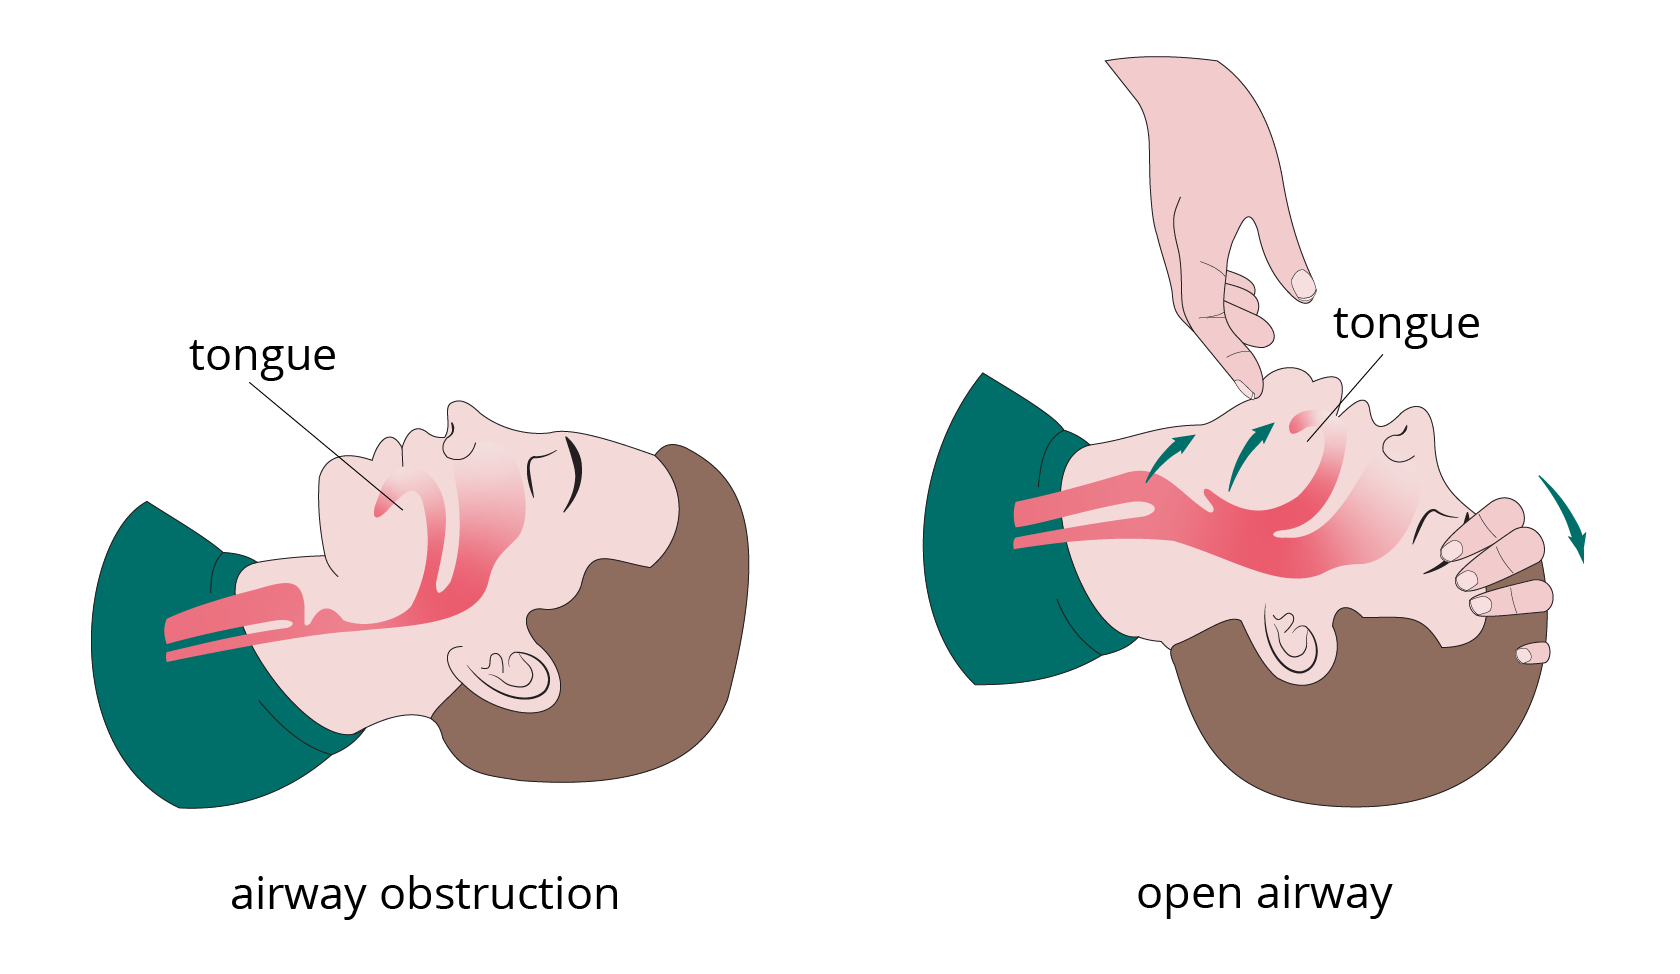 Opening the airway